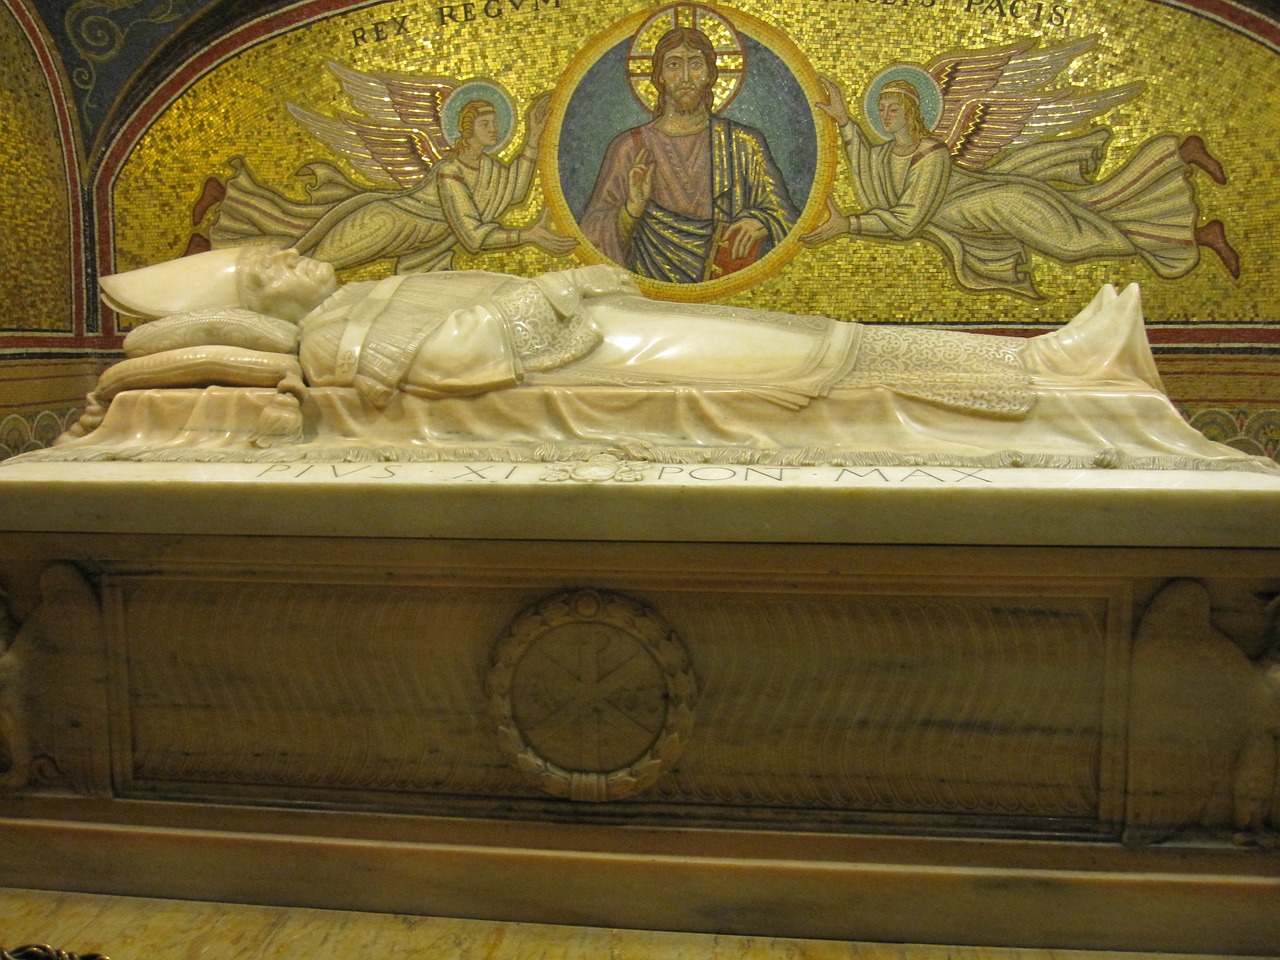 Visiting the Tomb of St Peter – novelromealone